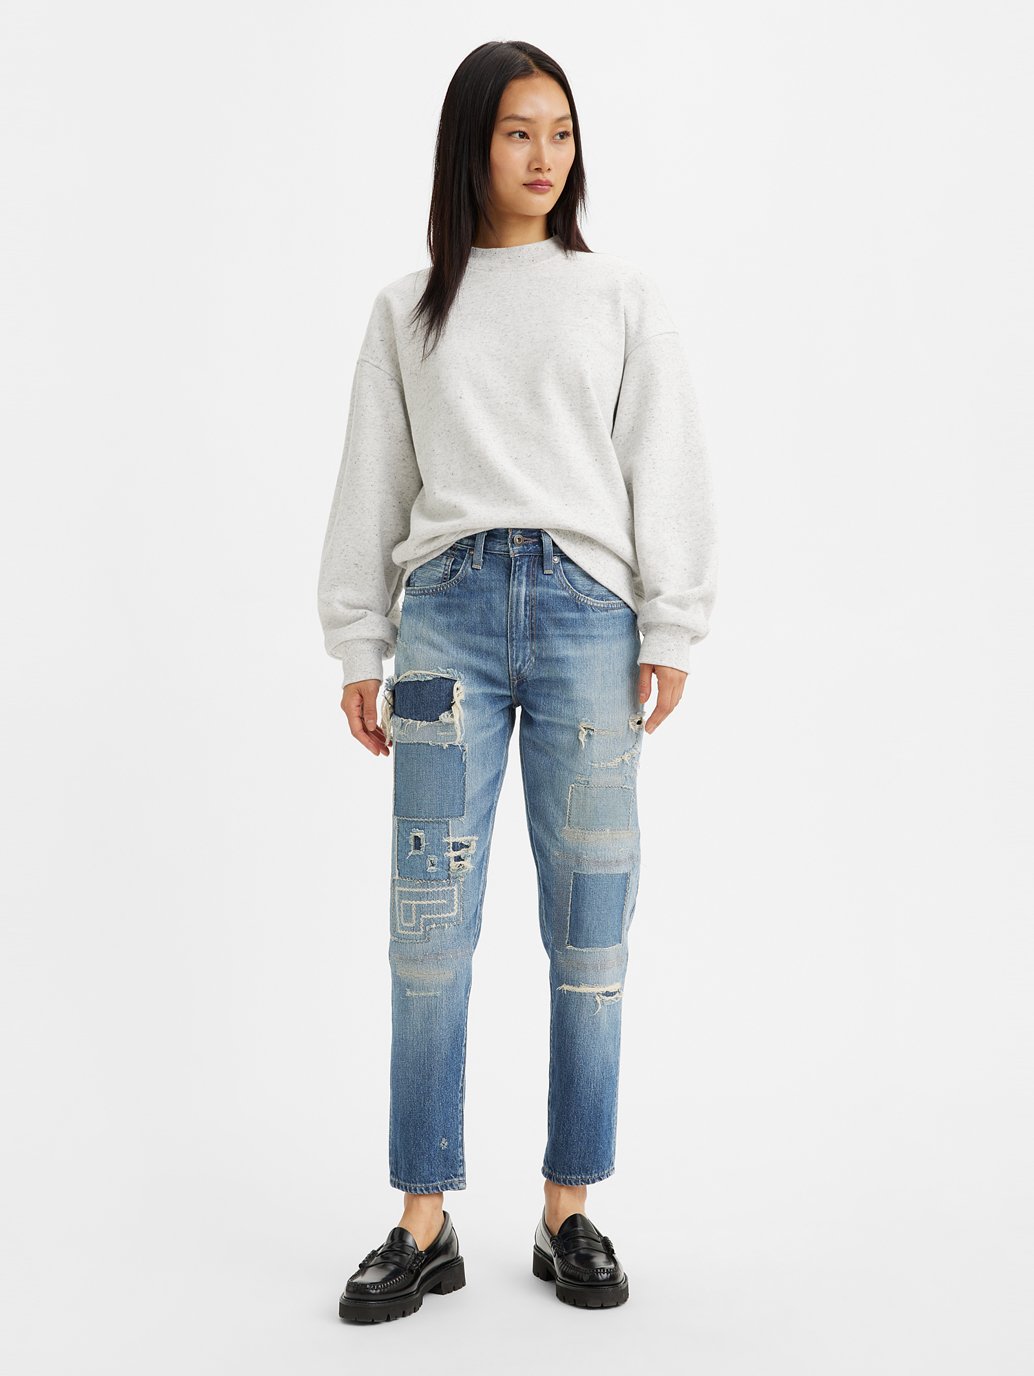 Buy Levi's® Made & Crafted® Women's High-Rise Boyfriend Jeans